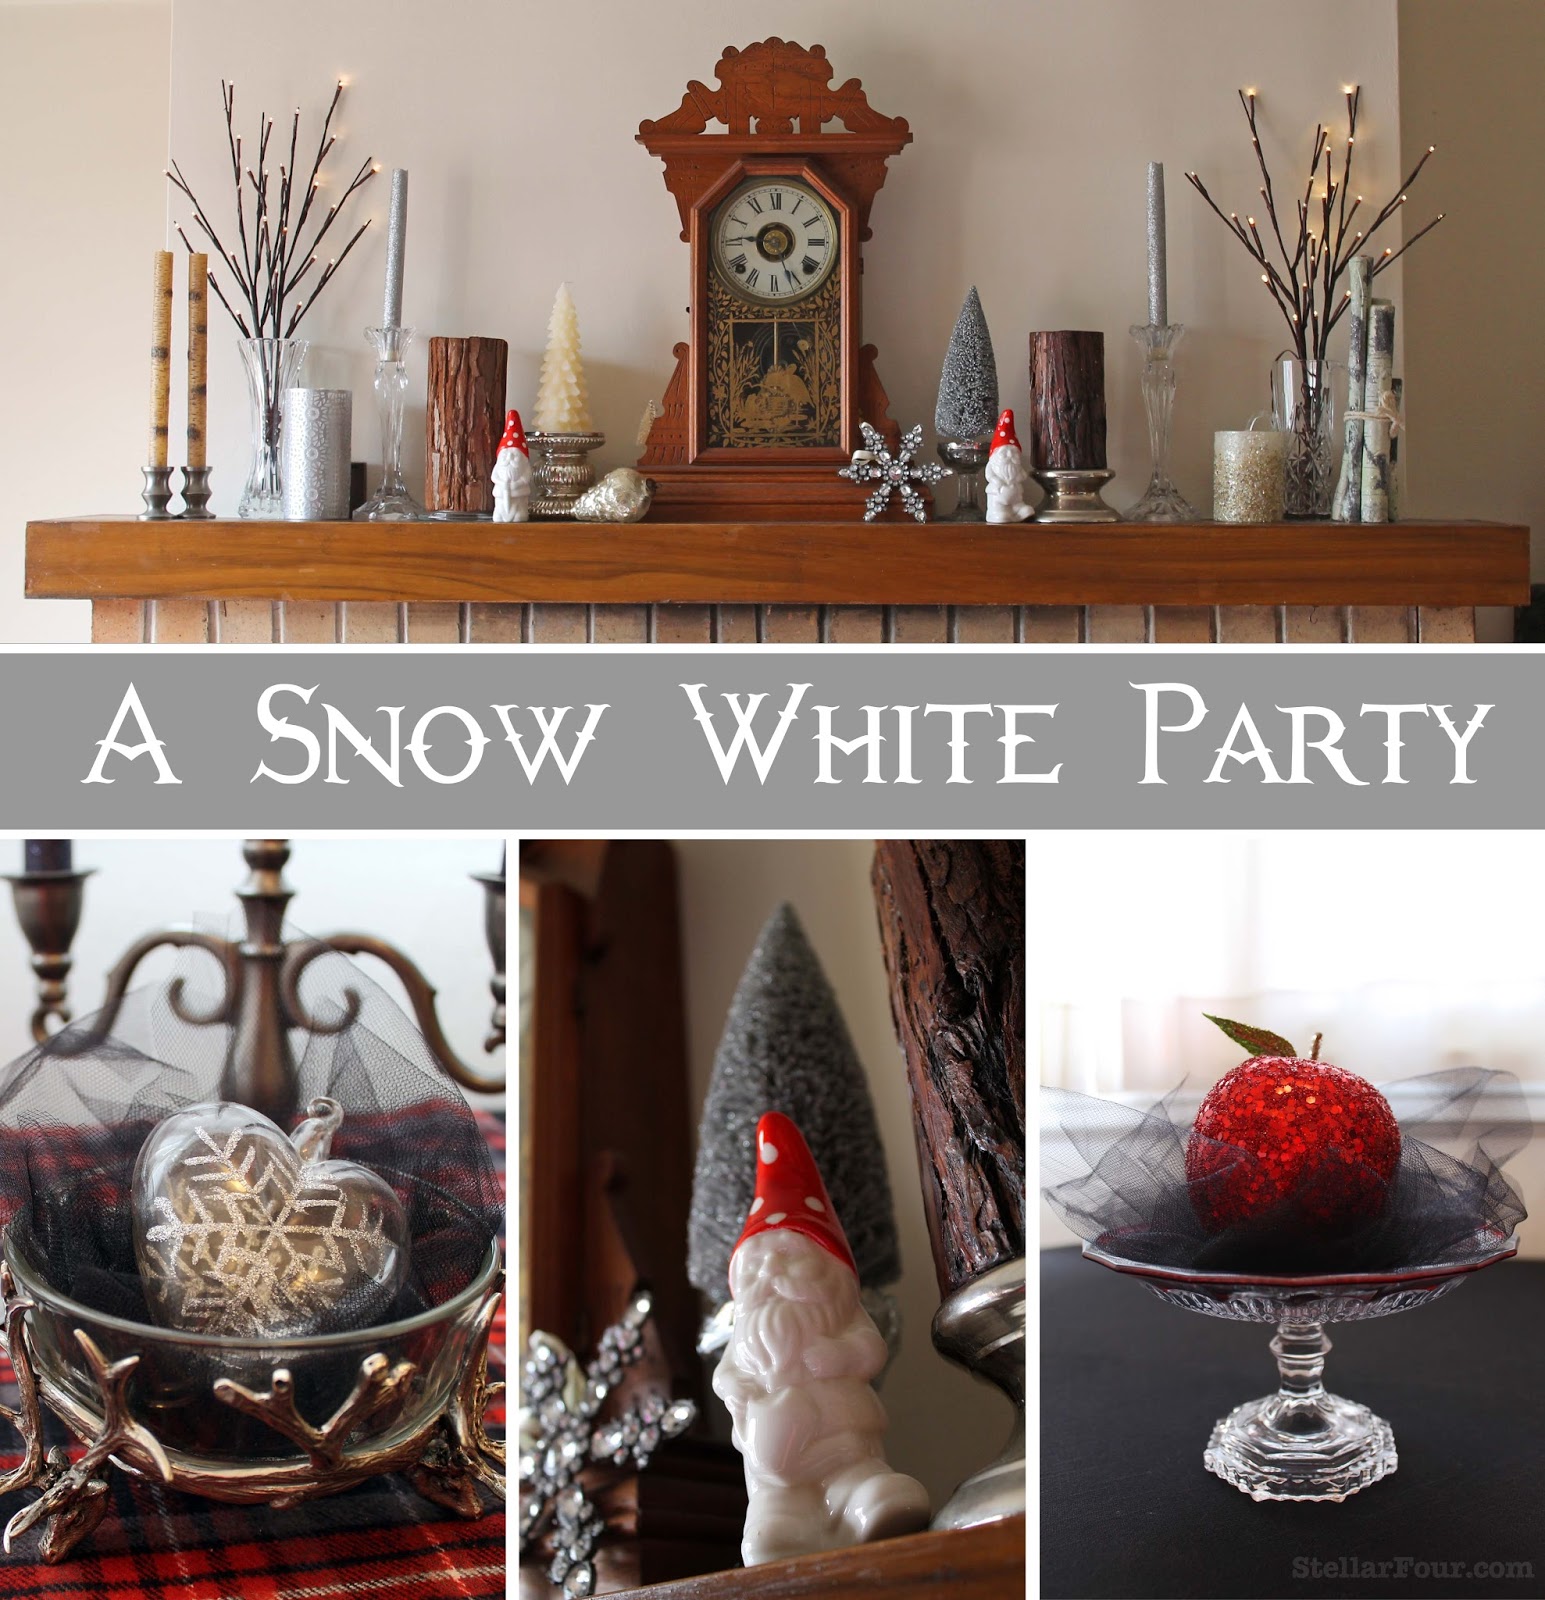 Stellar Four Decorating  Ideas  for A Snow White  Party 